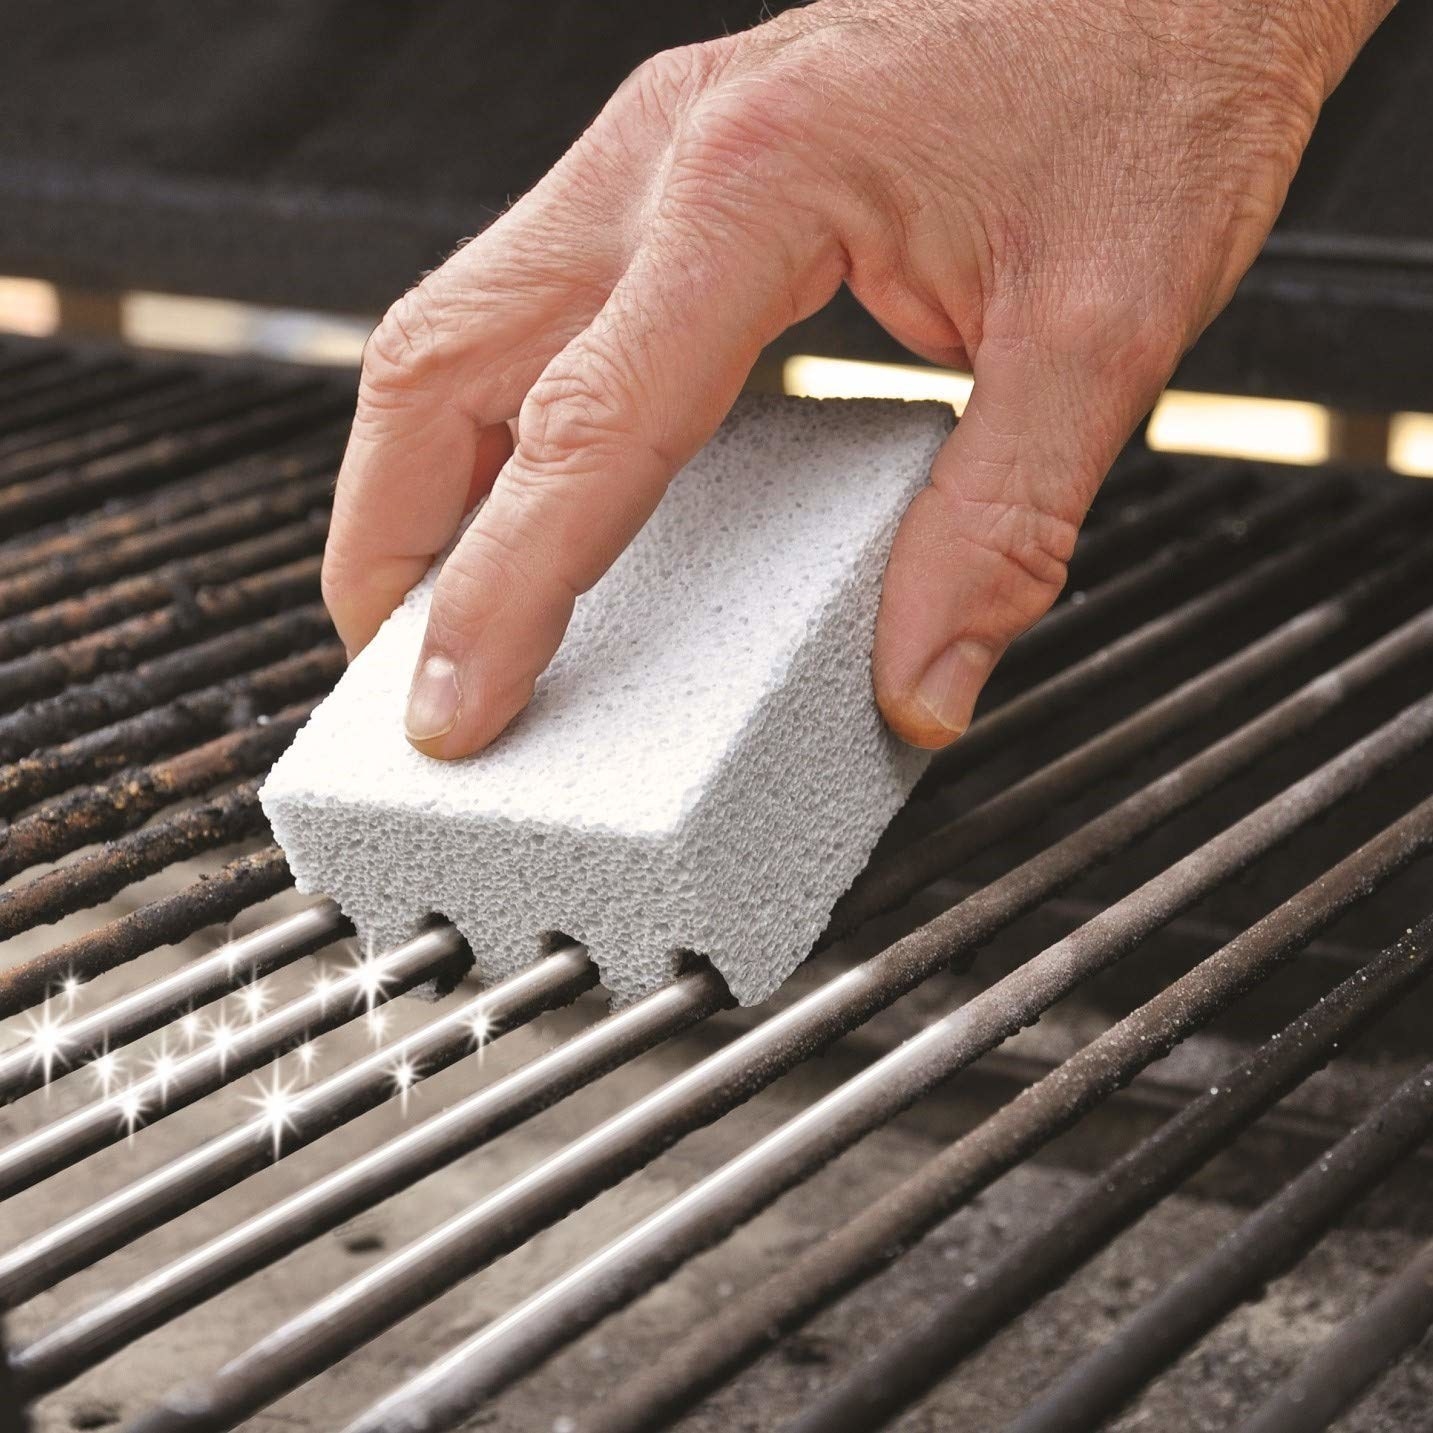 Grill scrubber in hand being used on grill 